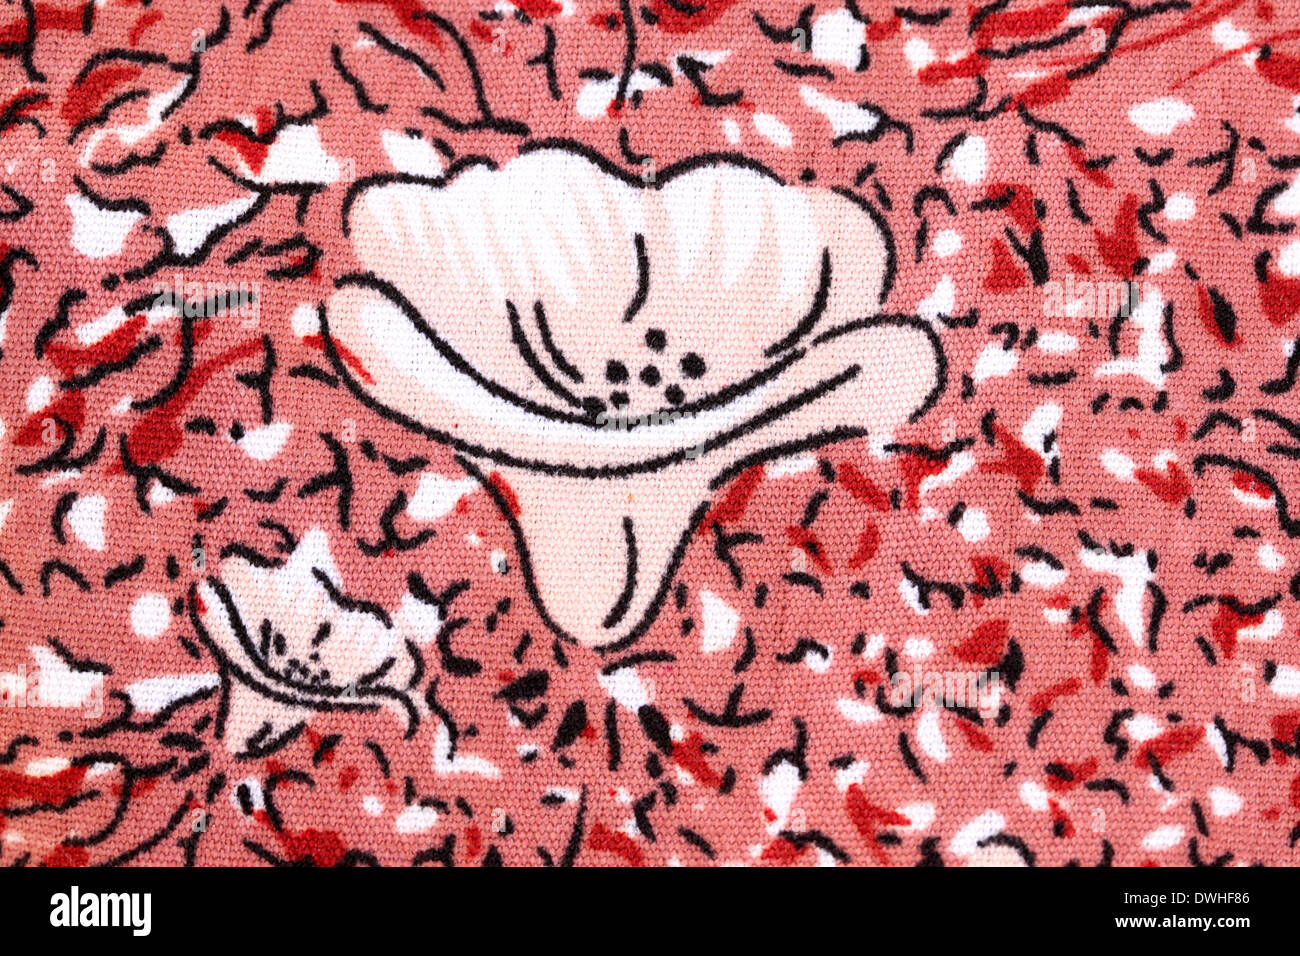 Design of Red flower pattern on fabric for background. Stock Photo